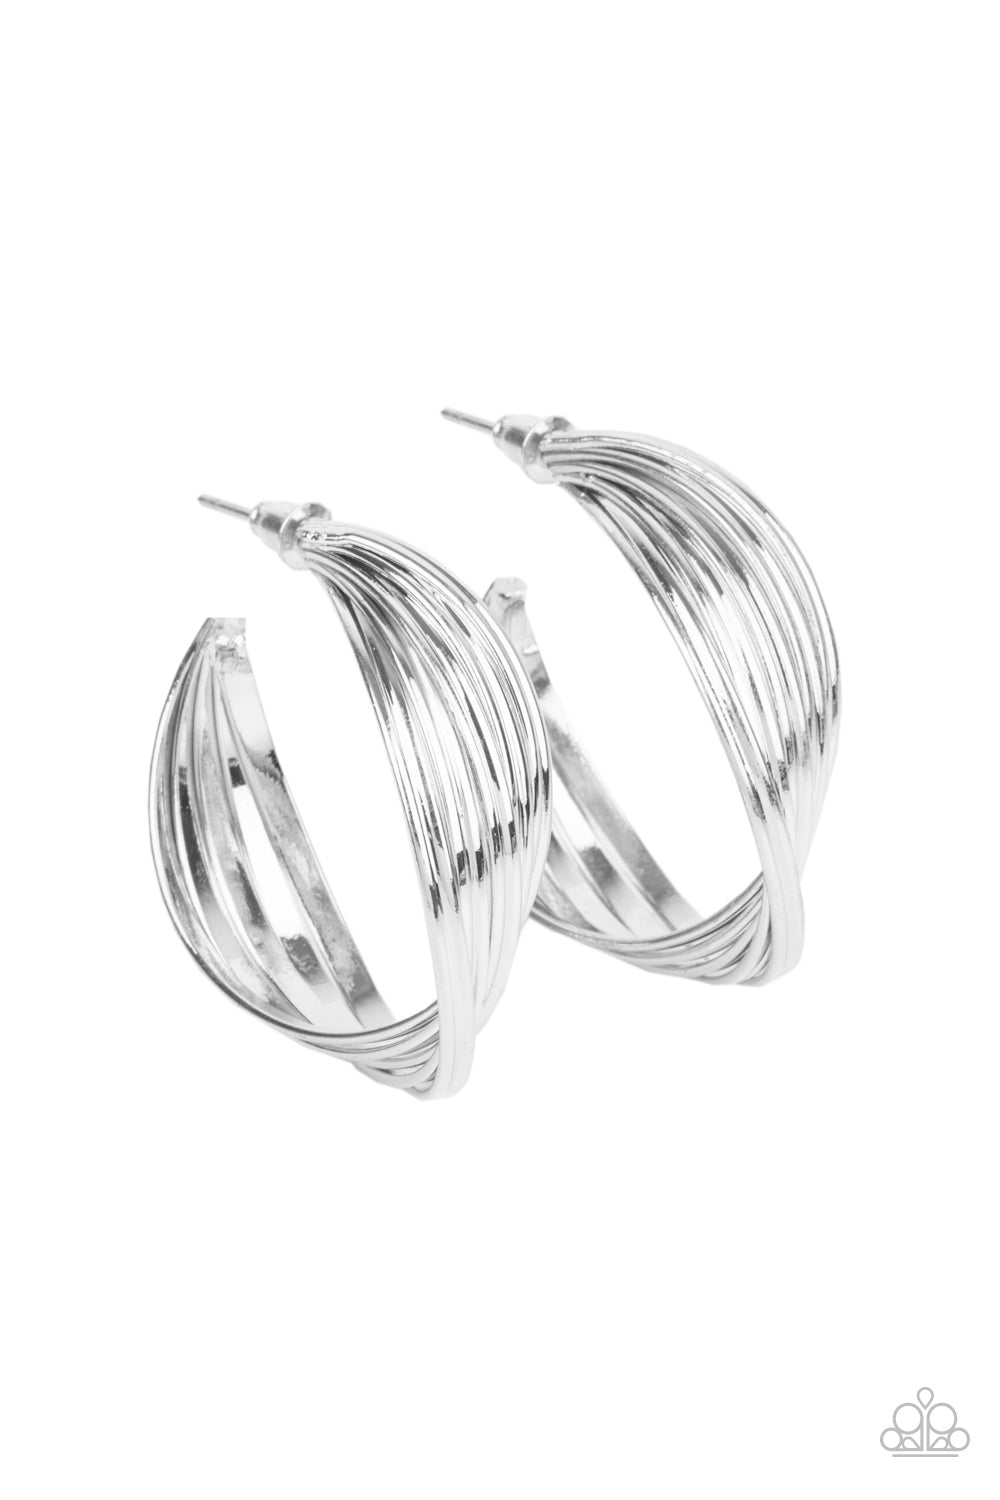 Paparazzi Accessories Curves In All the Right Places - Silver Earrings stack of shiny silver hoops delicately twists at the center, creating a curvaceous display. Earring attaches to a standard post fitting. Hoop measures approximately 1 1/4" in diameter.  Sold as one pair of hoop earrings.  Paparazzi Jewelry is lead and nickel free so it's perfect for sensitive skin too!